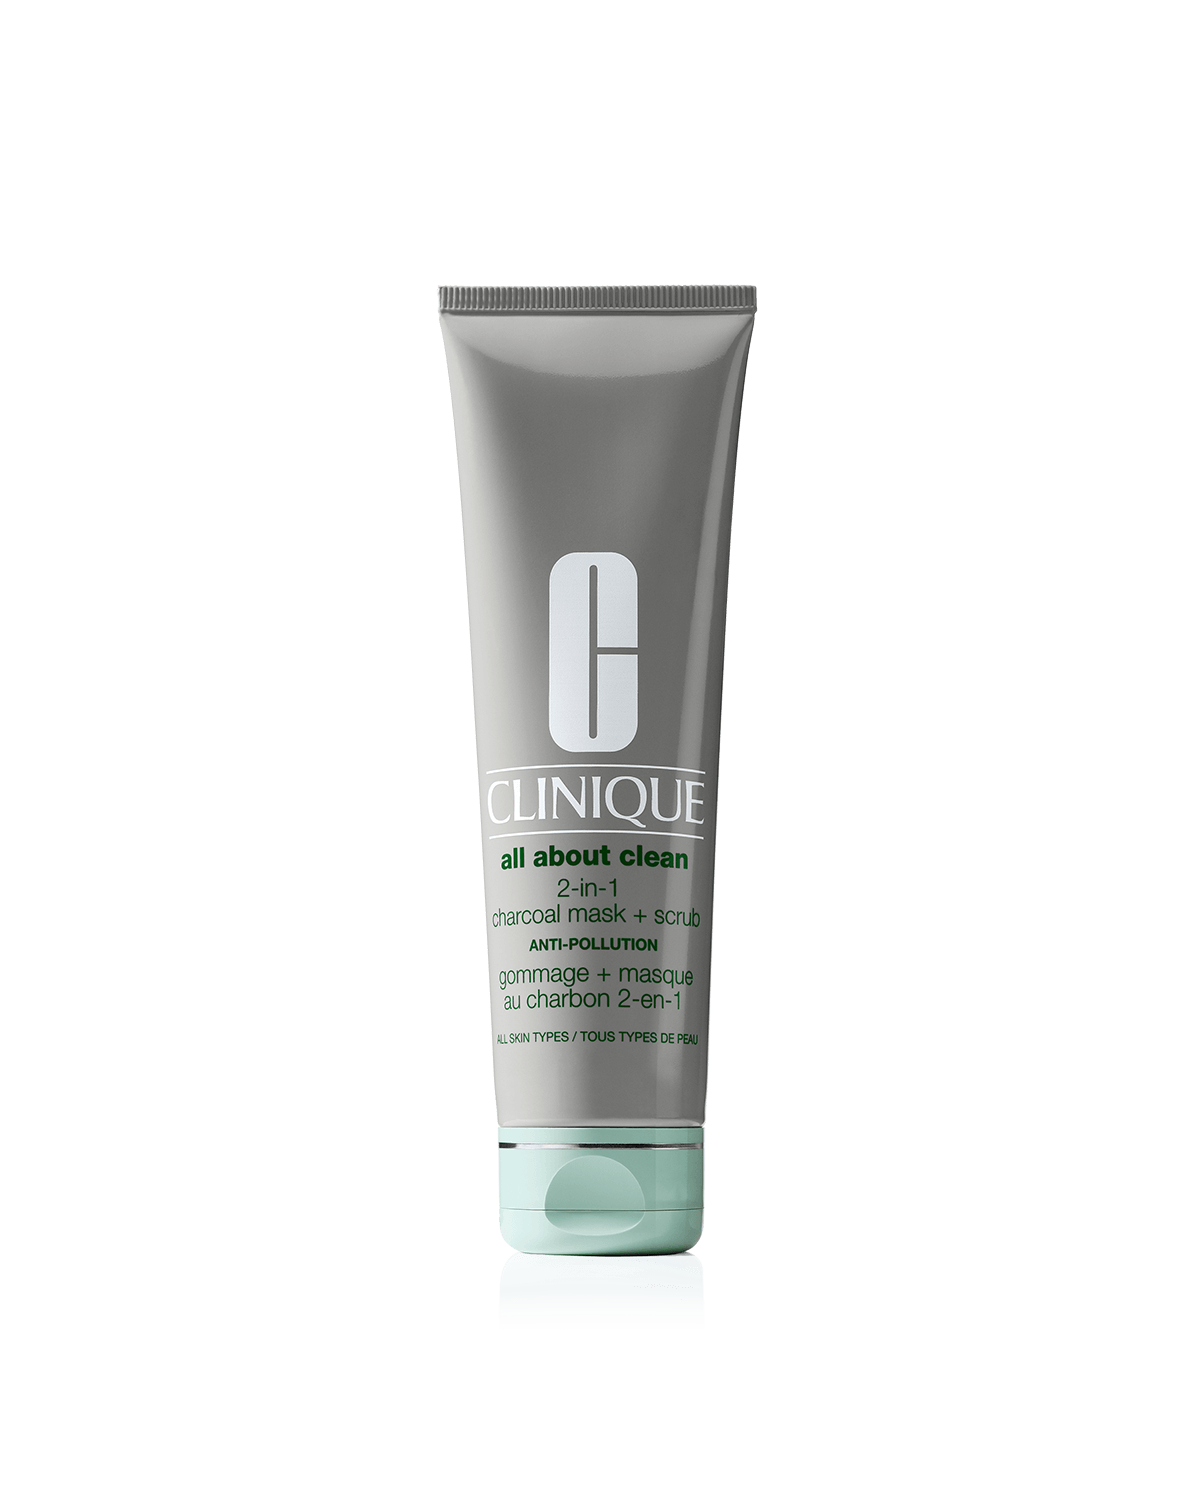 All About Clean™ 2-in-1 Mask + | Clinique